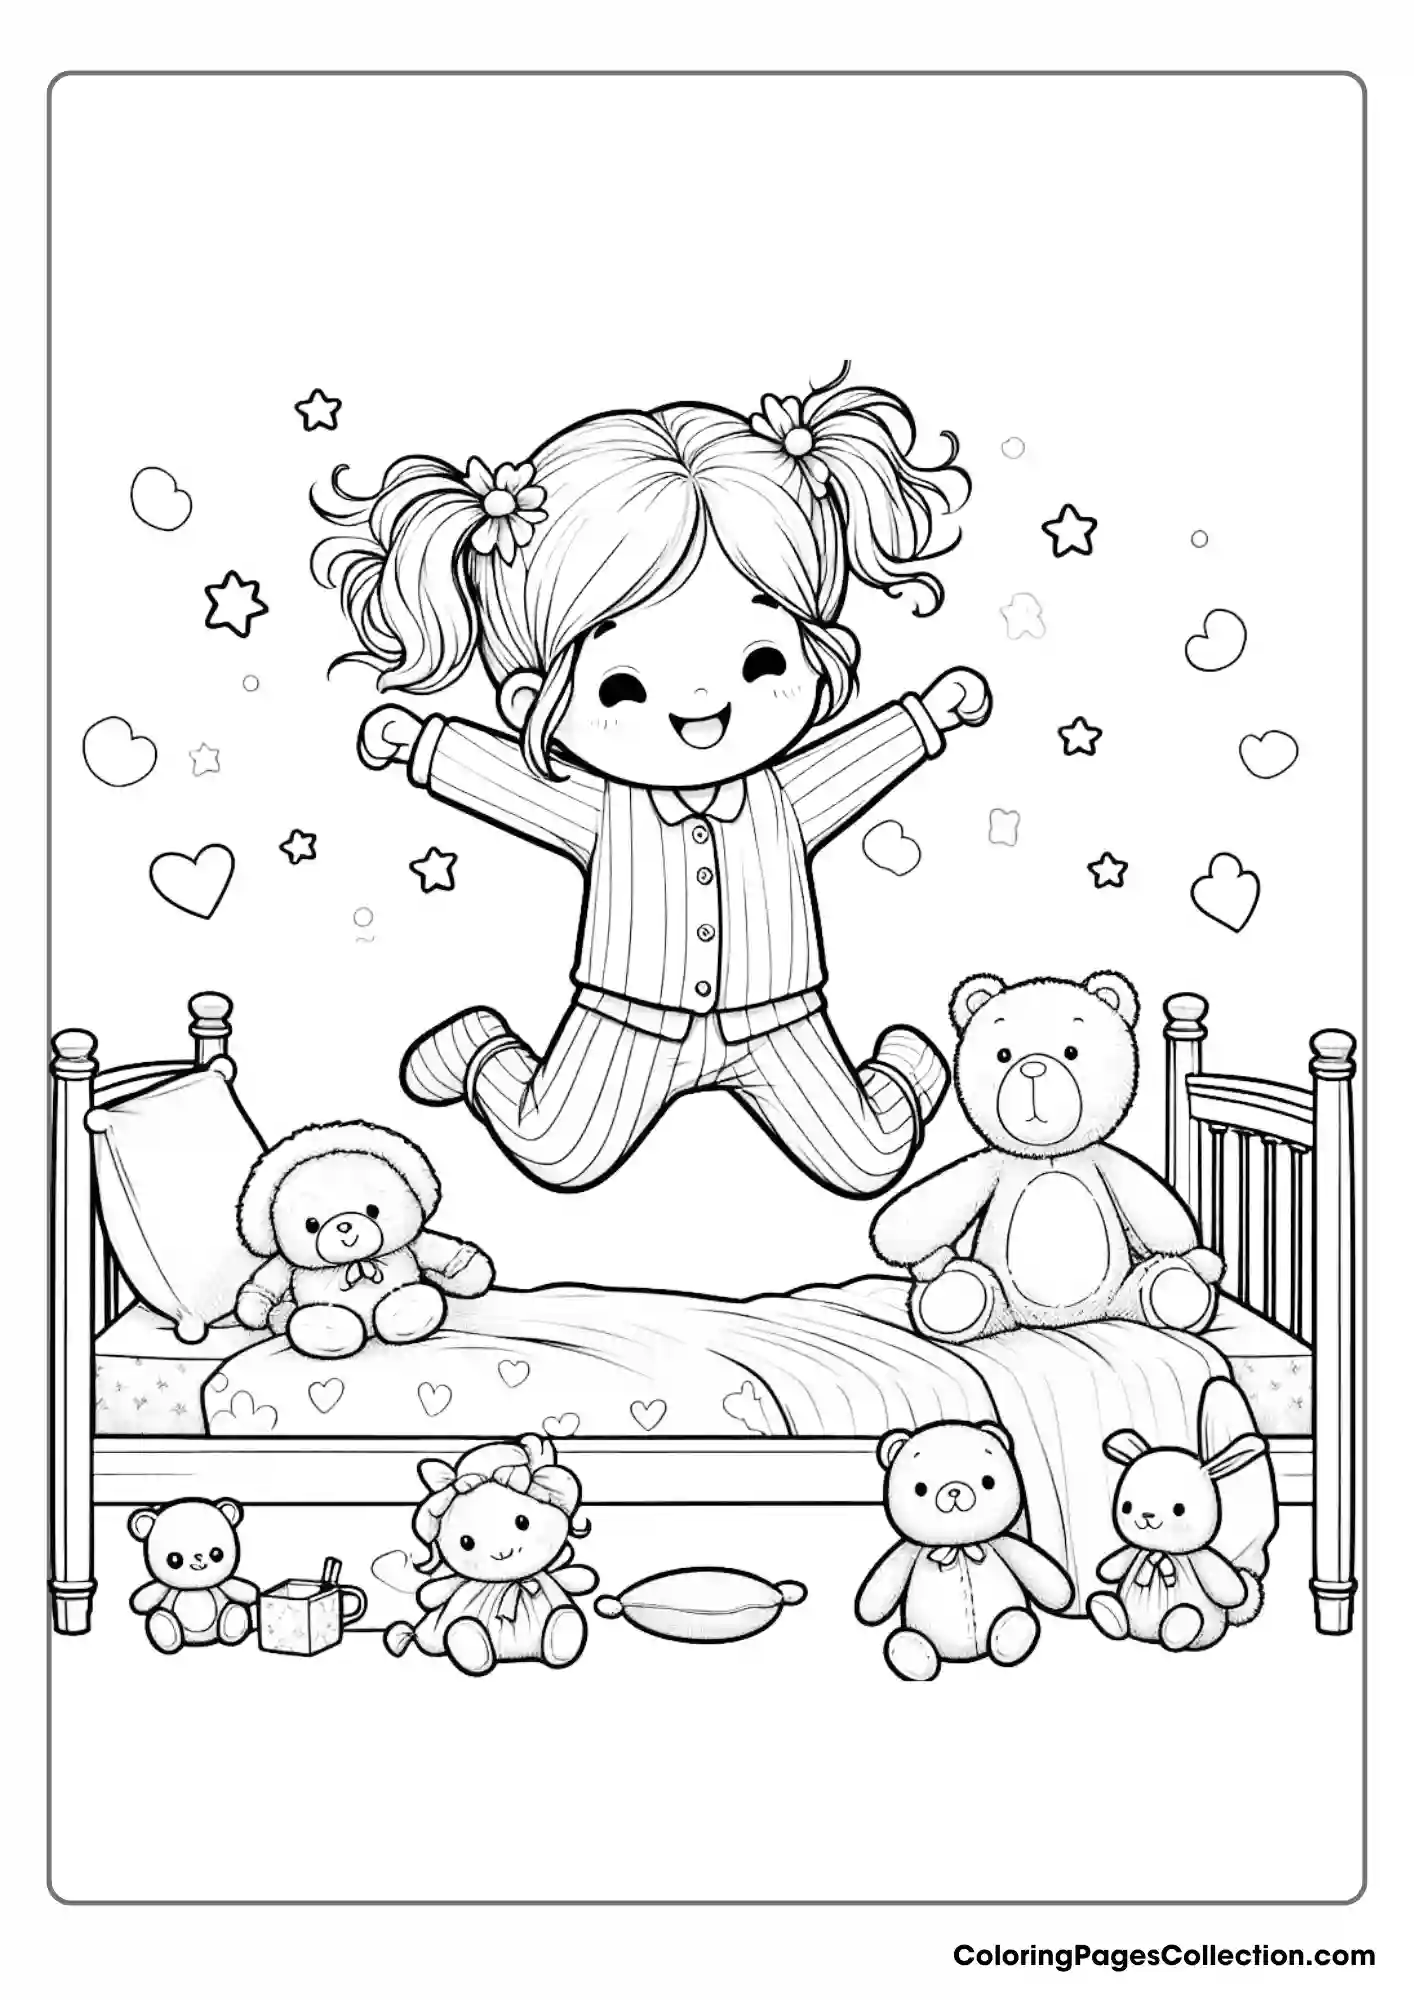 Little Girl Jumping On A Bed With Teddy Bears